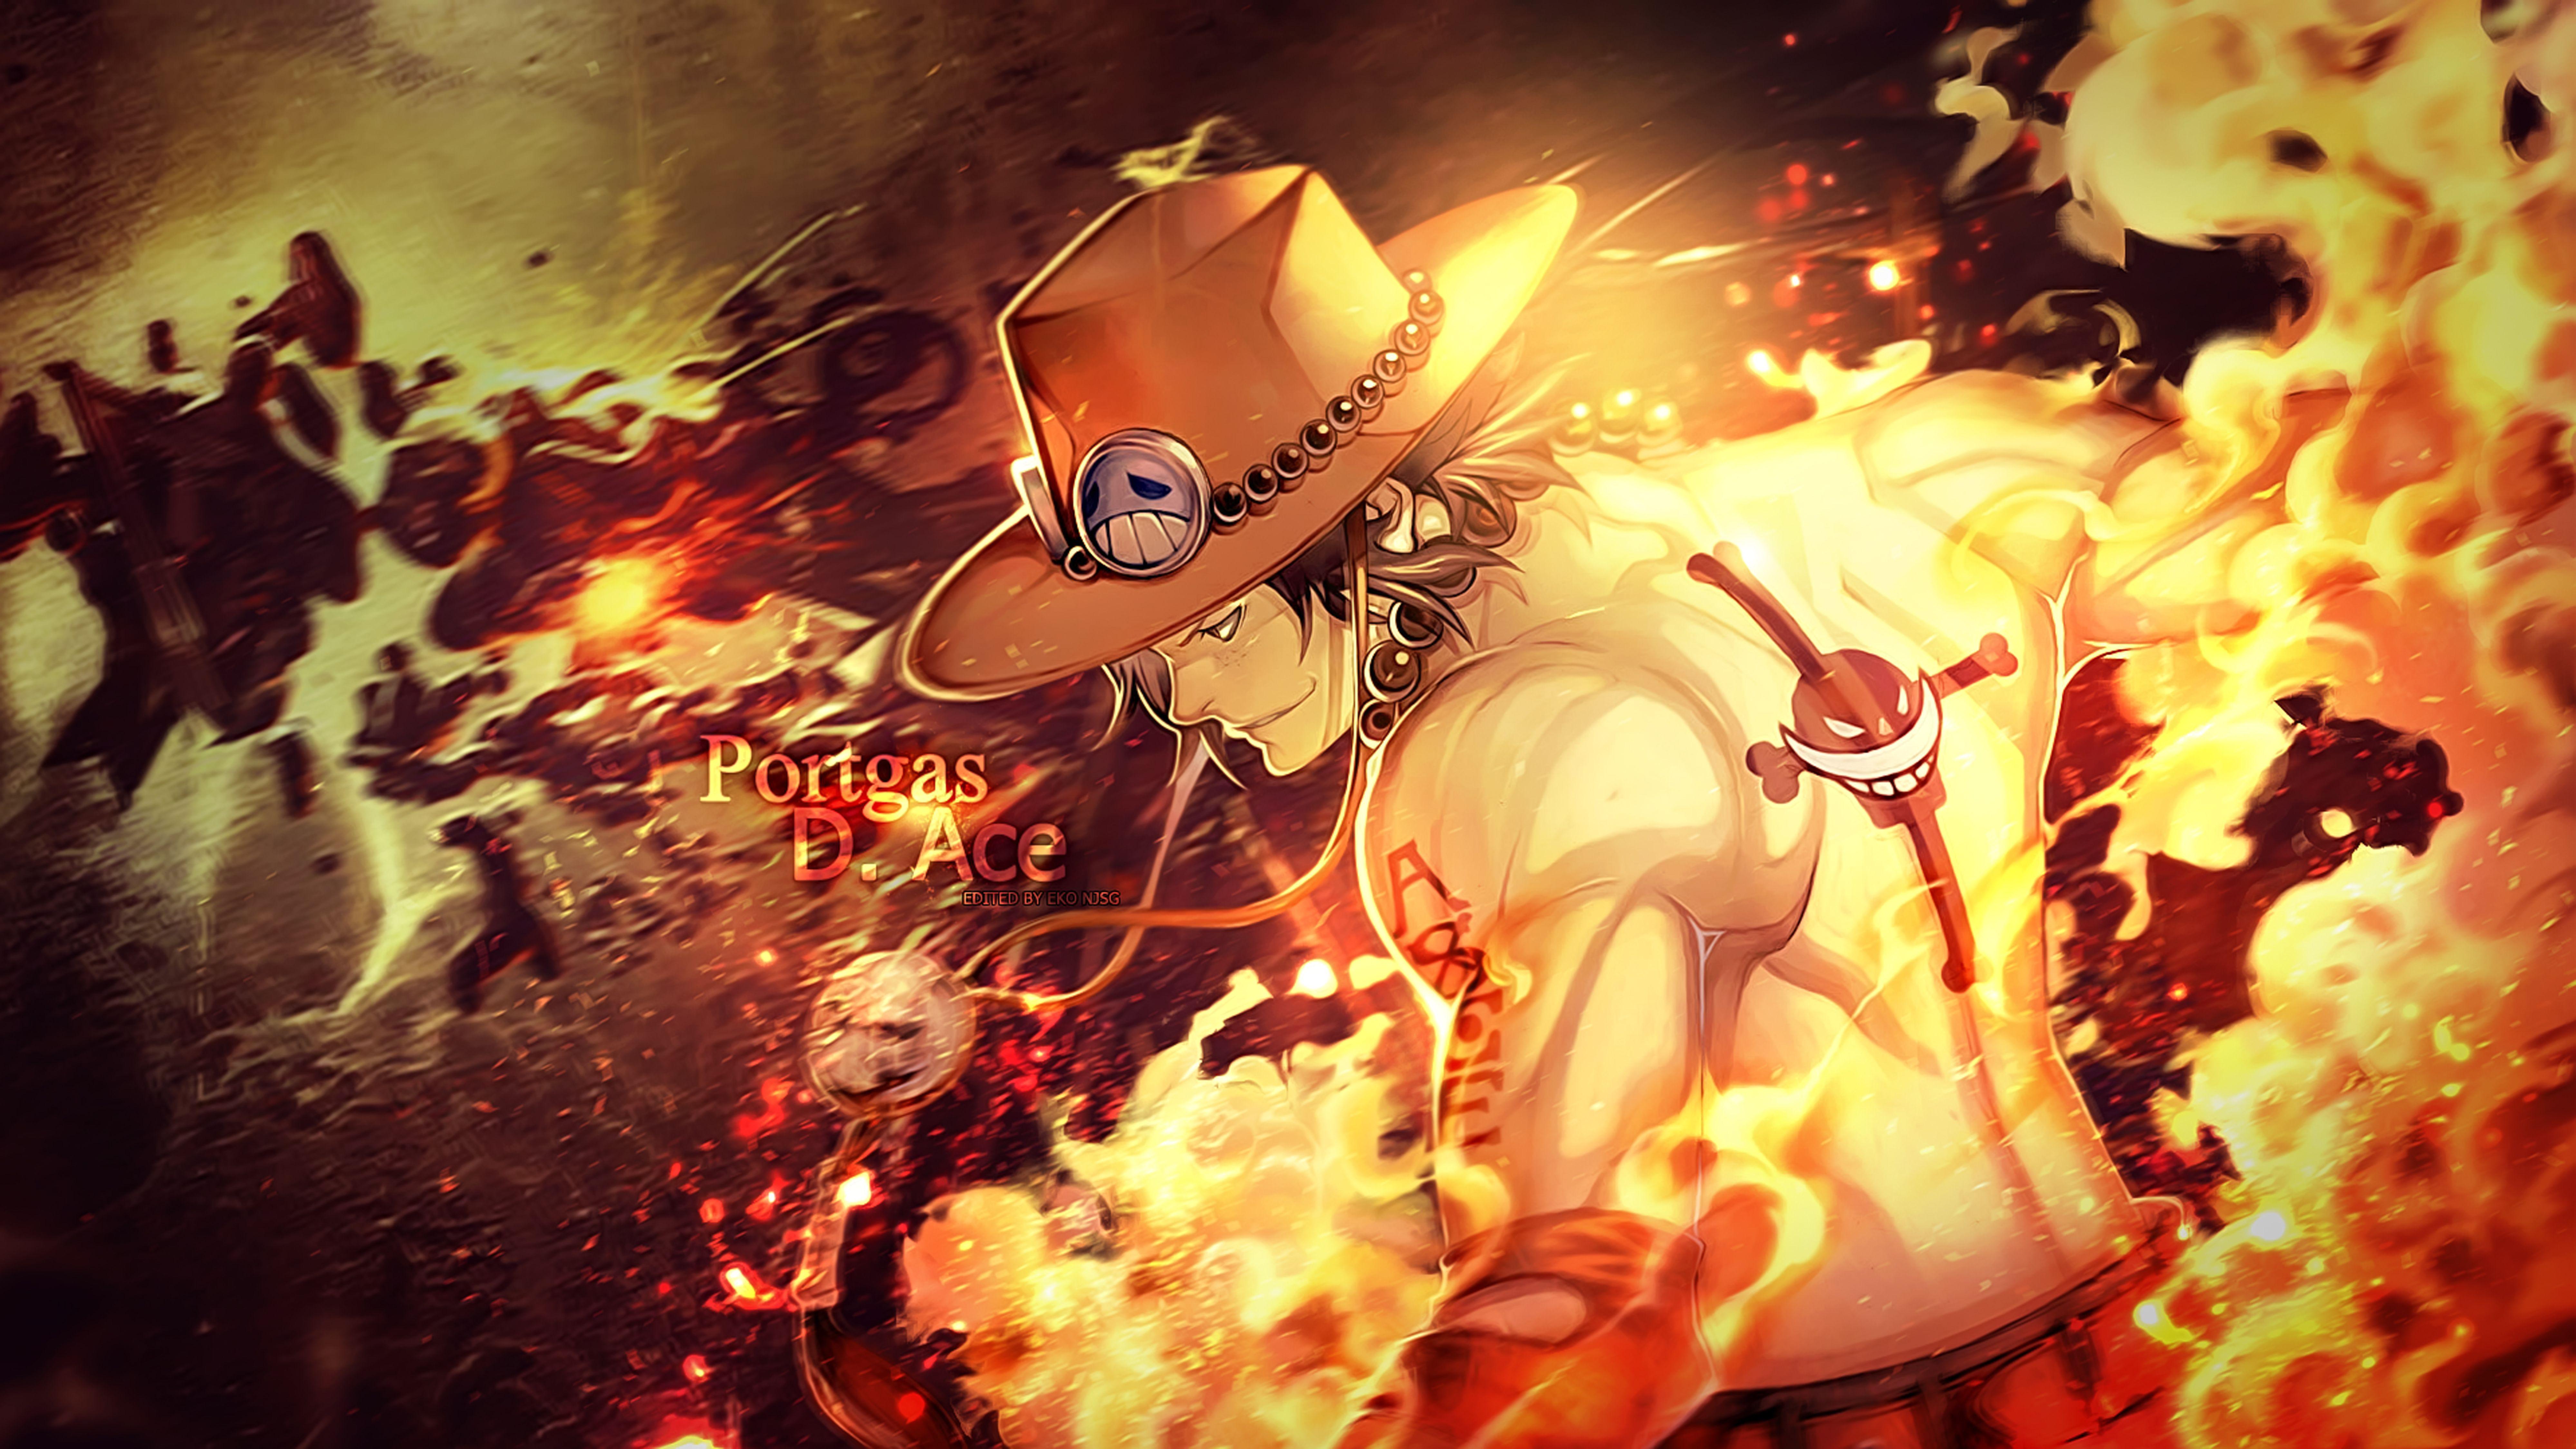 One Piece Ace Wallpapers - Top Free One Piece Ace ...